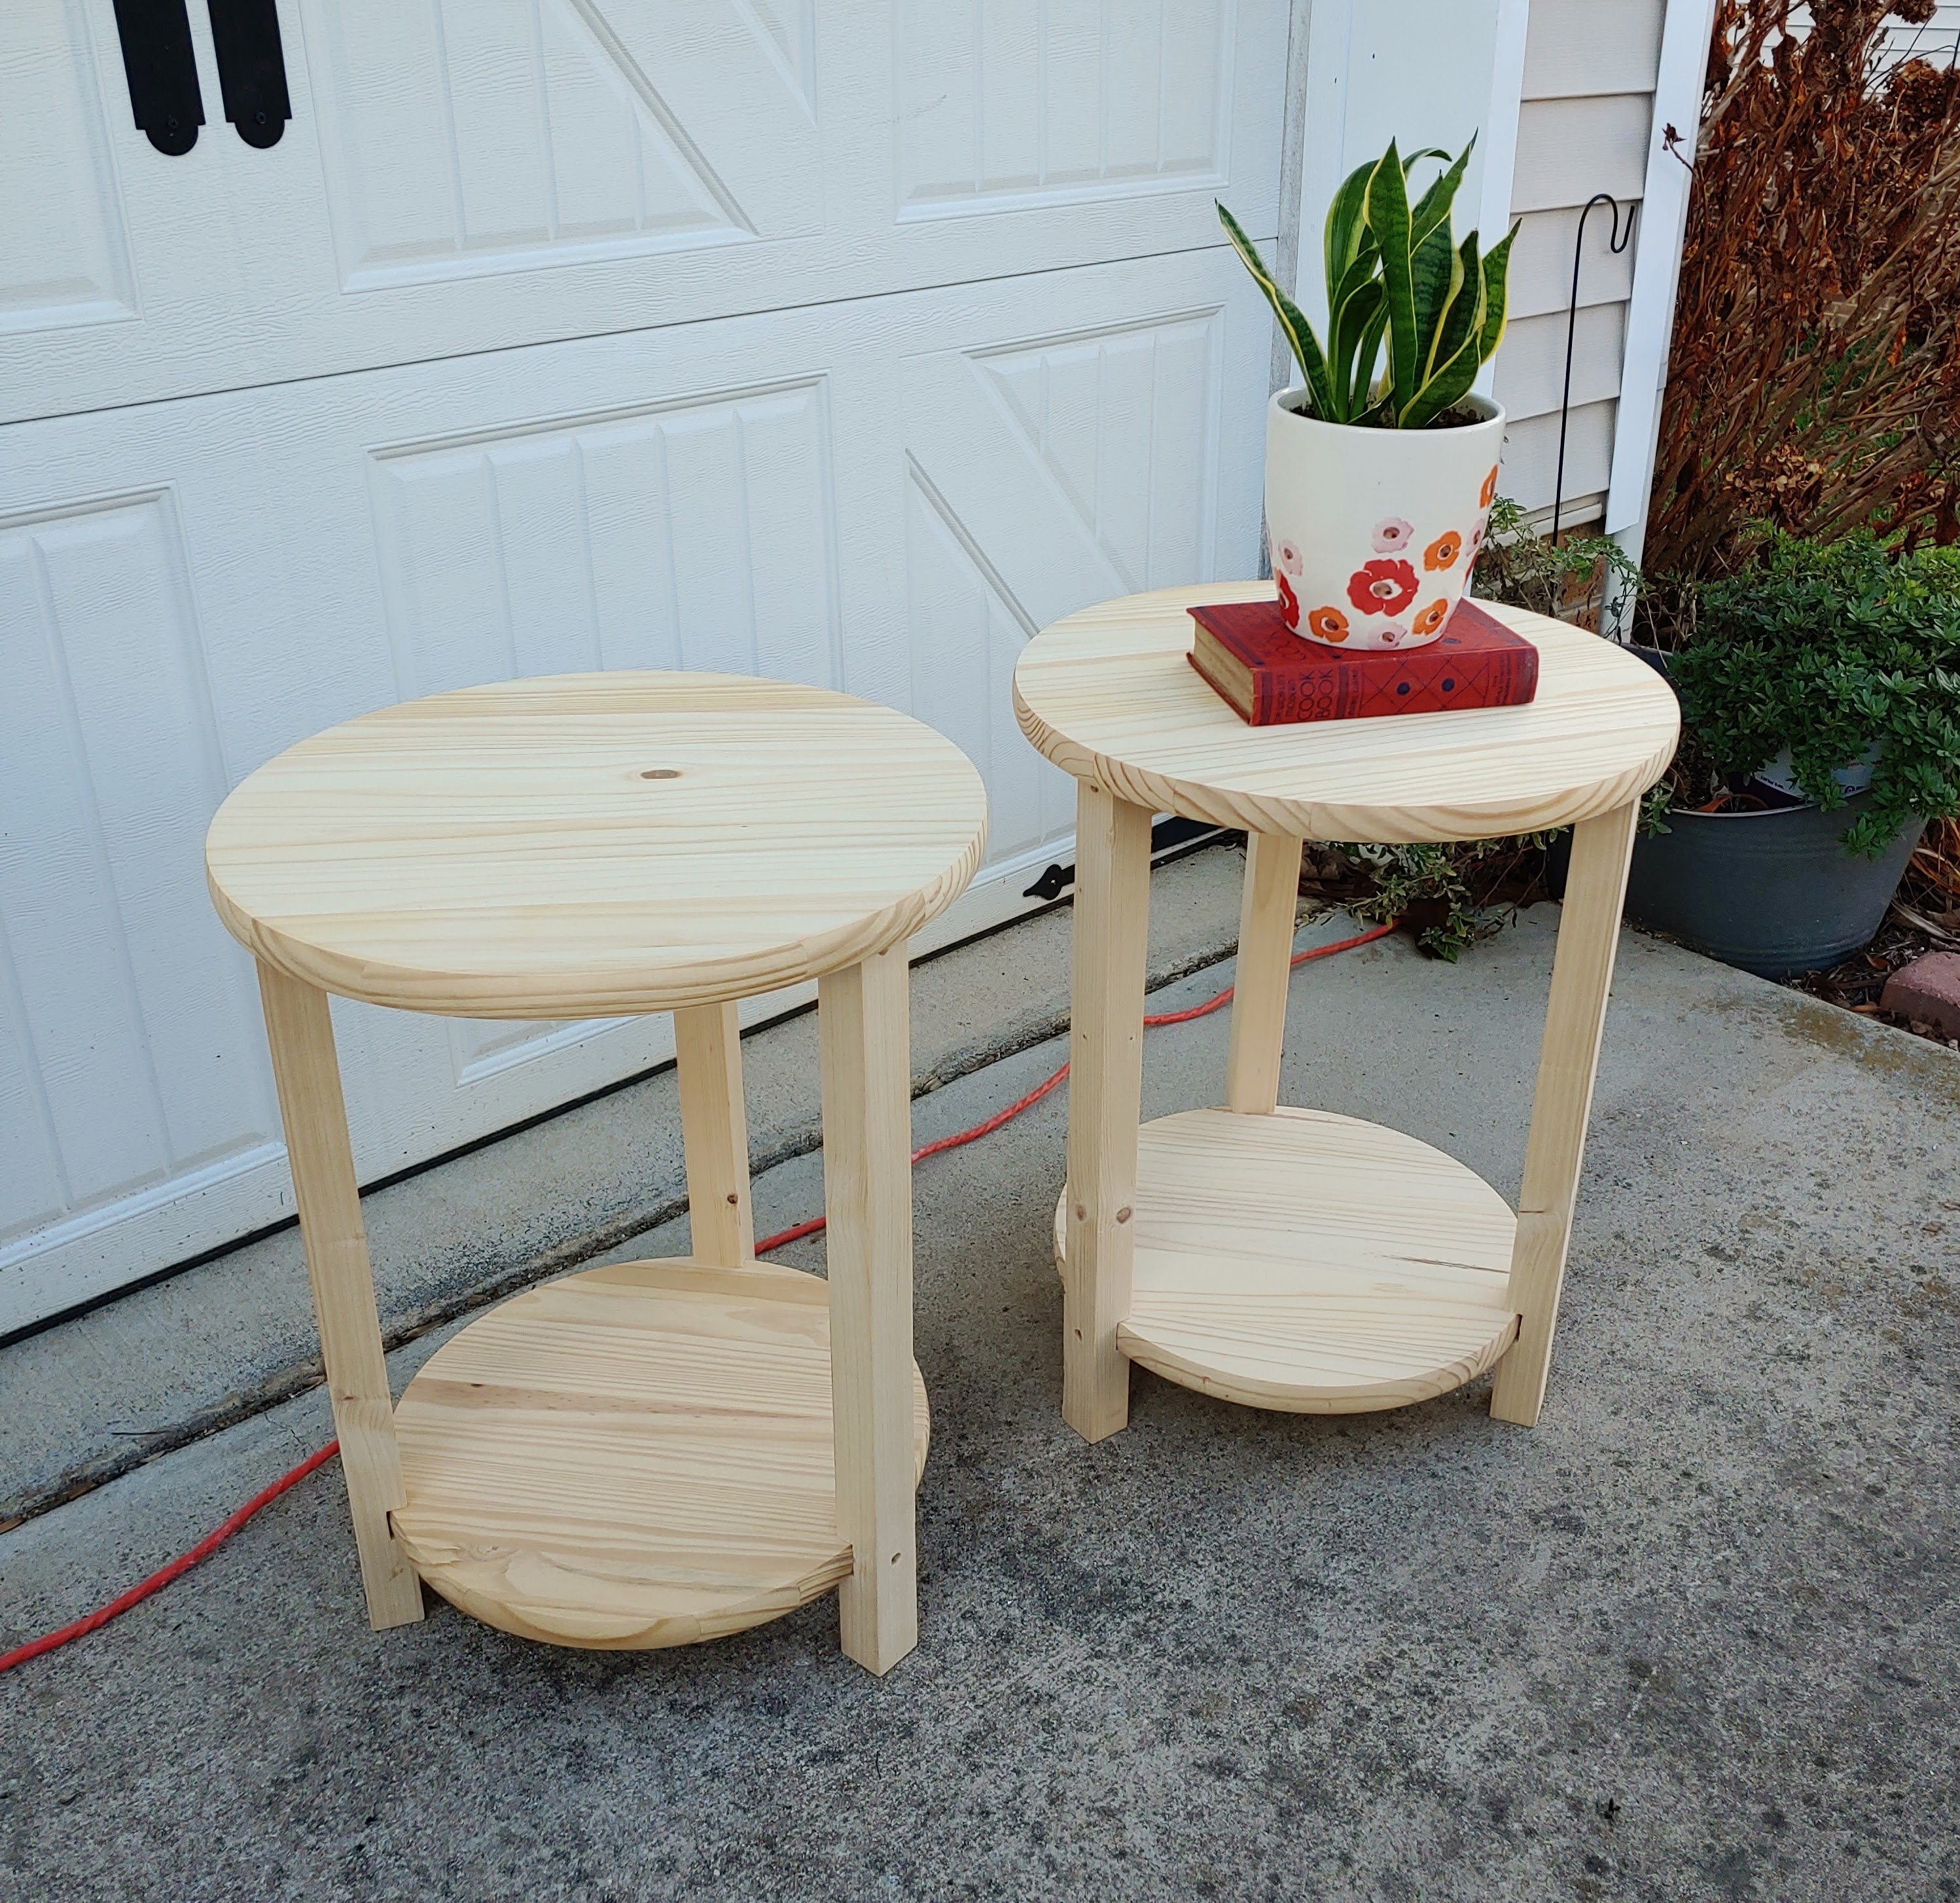 Small Round 2 Tier Wooden Side End Table for Small Spaces Bedroom